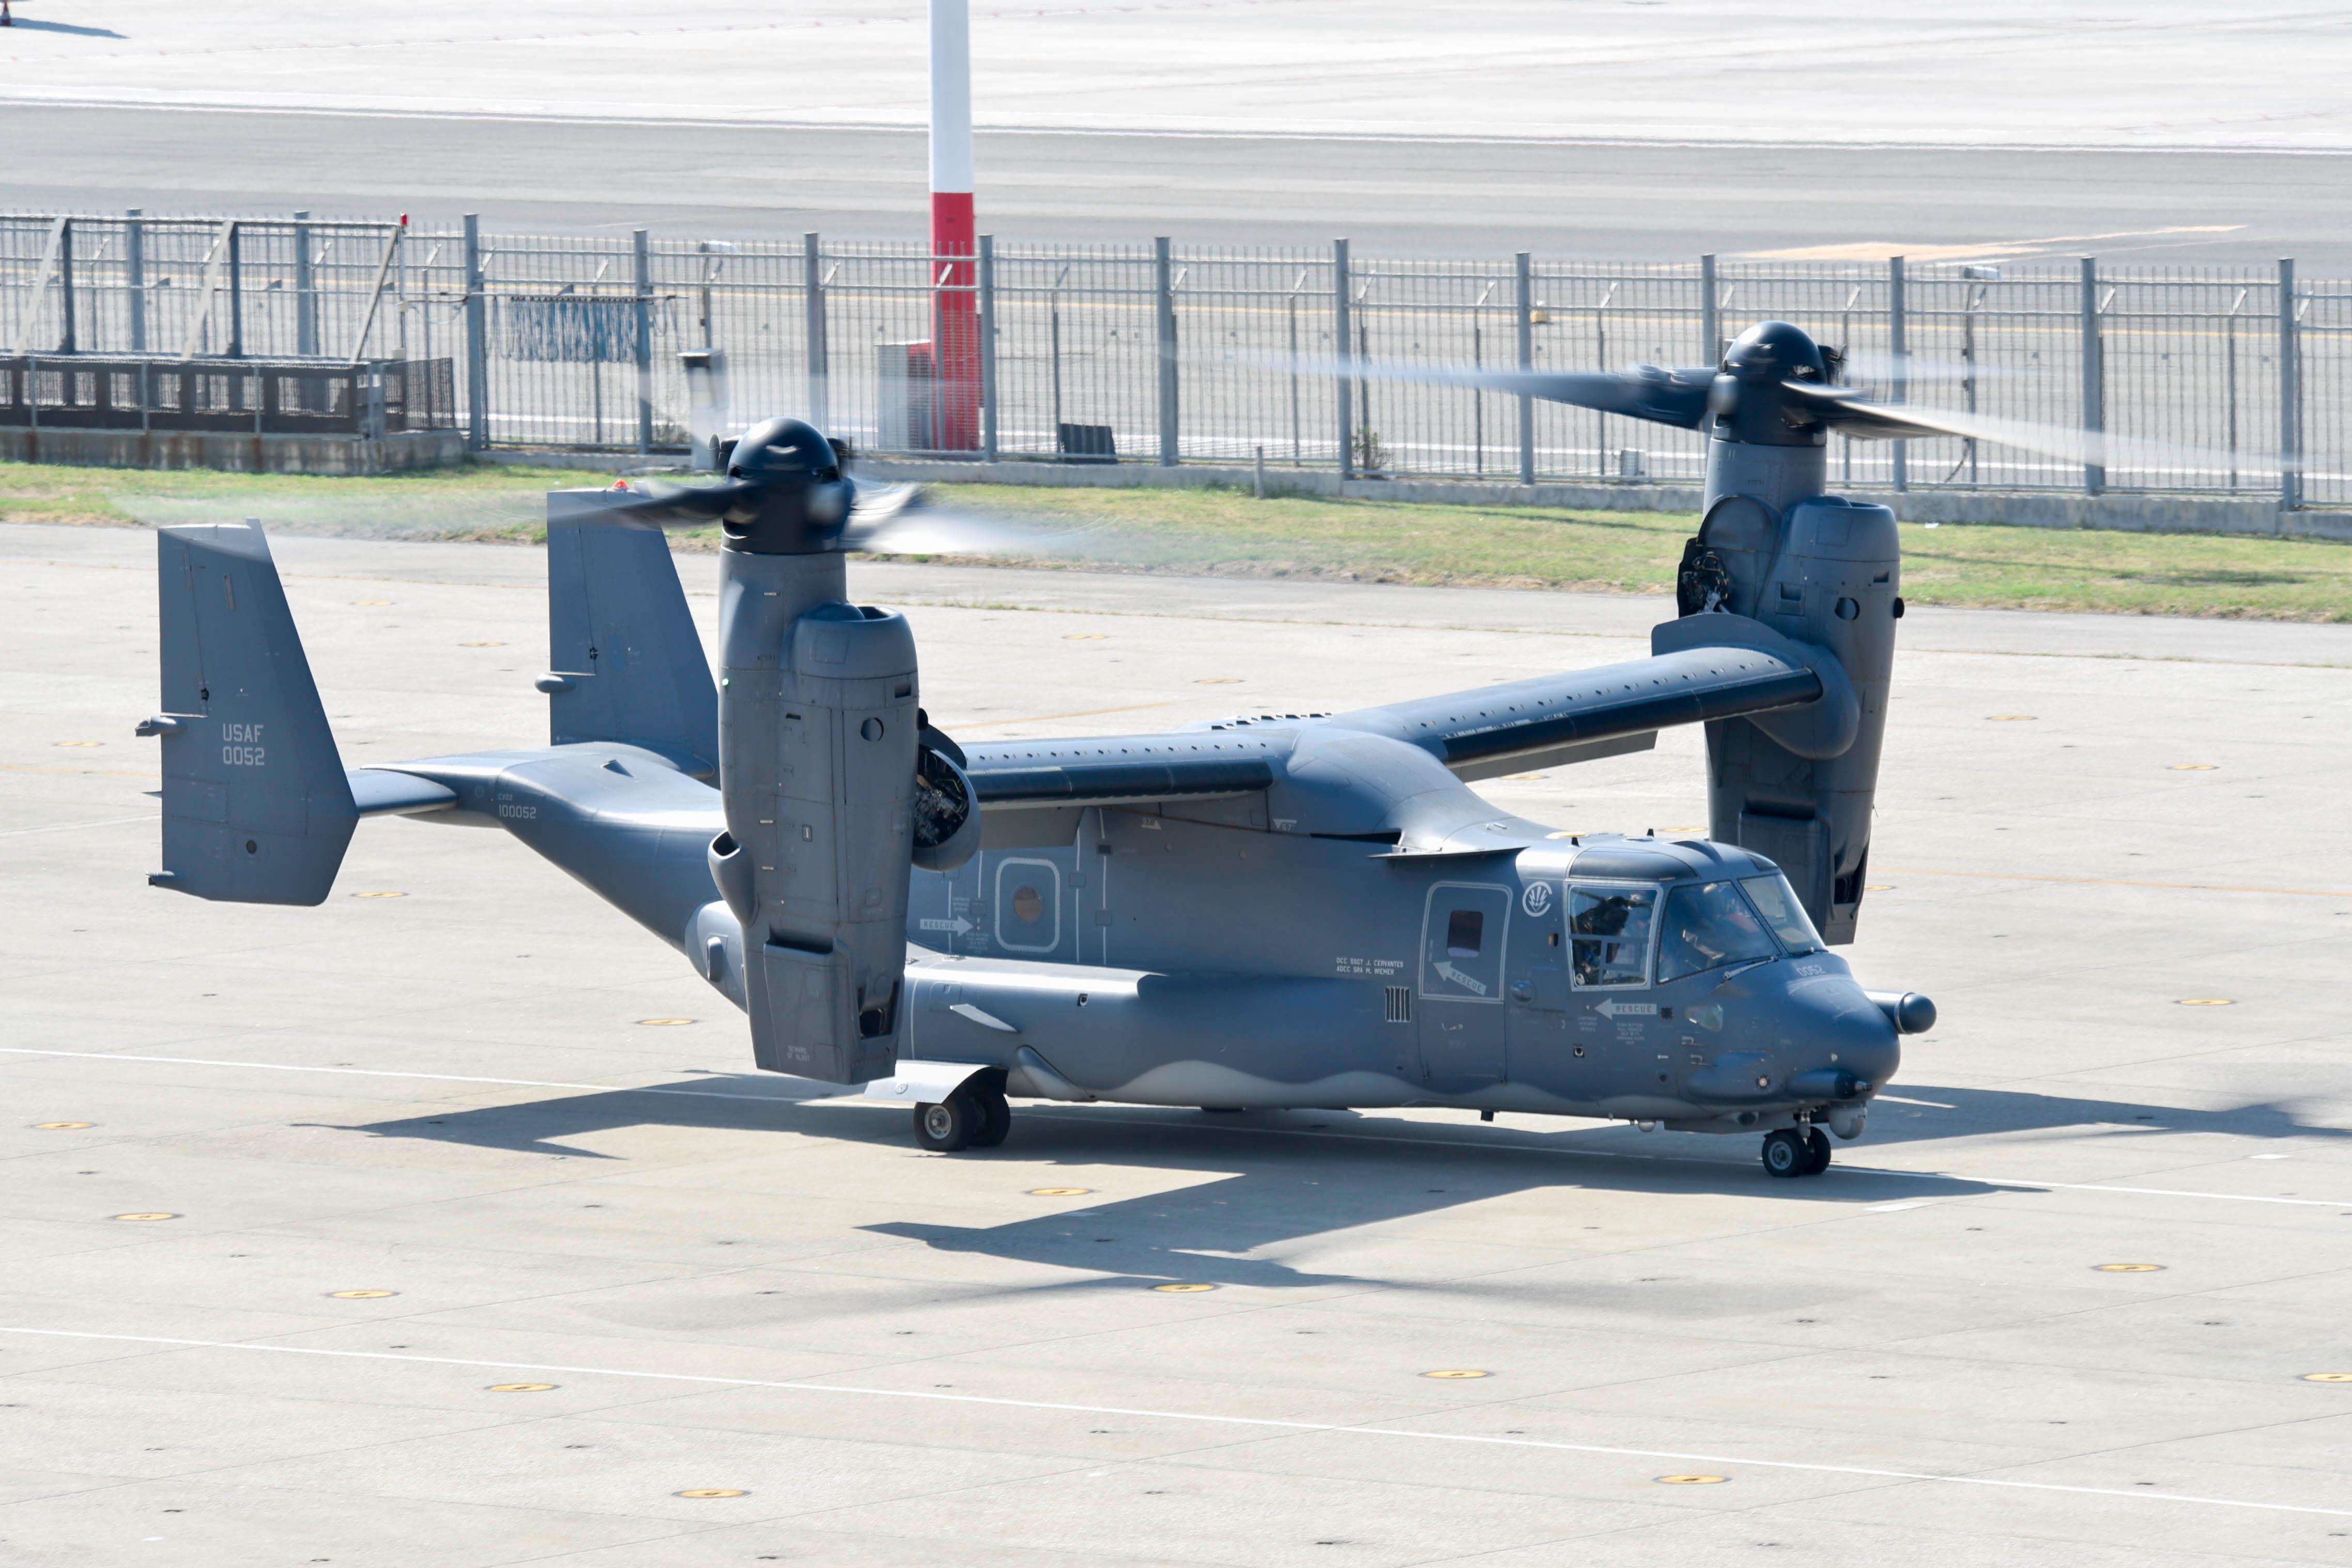 A U.S. Air Force CV-22B Osprey, attached to the 352d Special Operations Wing at RAF Mildenhall, U.K., prepares to depart Naval Support Activity (NSA) Naples after refueling, Aug. 12, 2020. NSA Naples